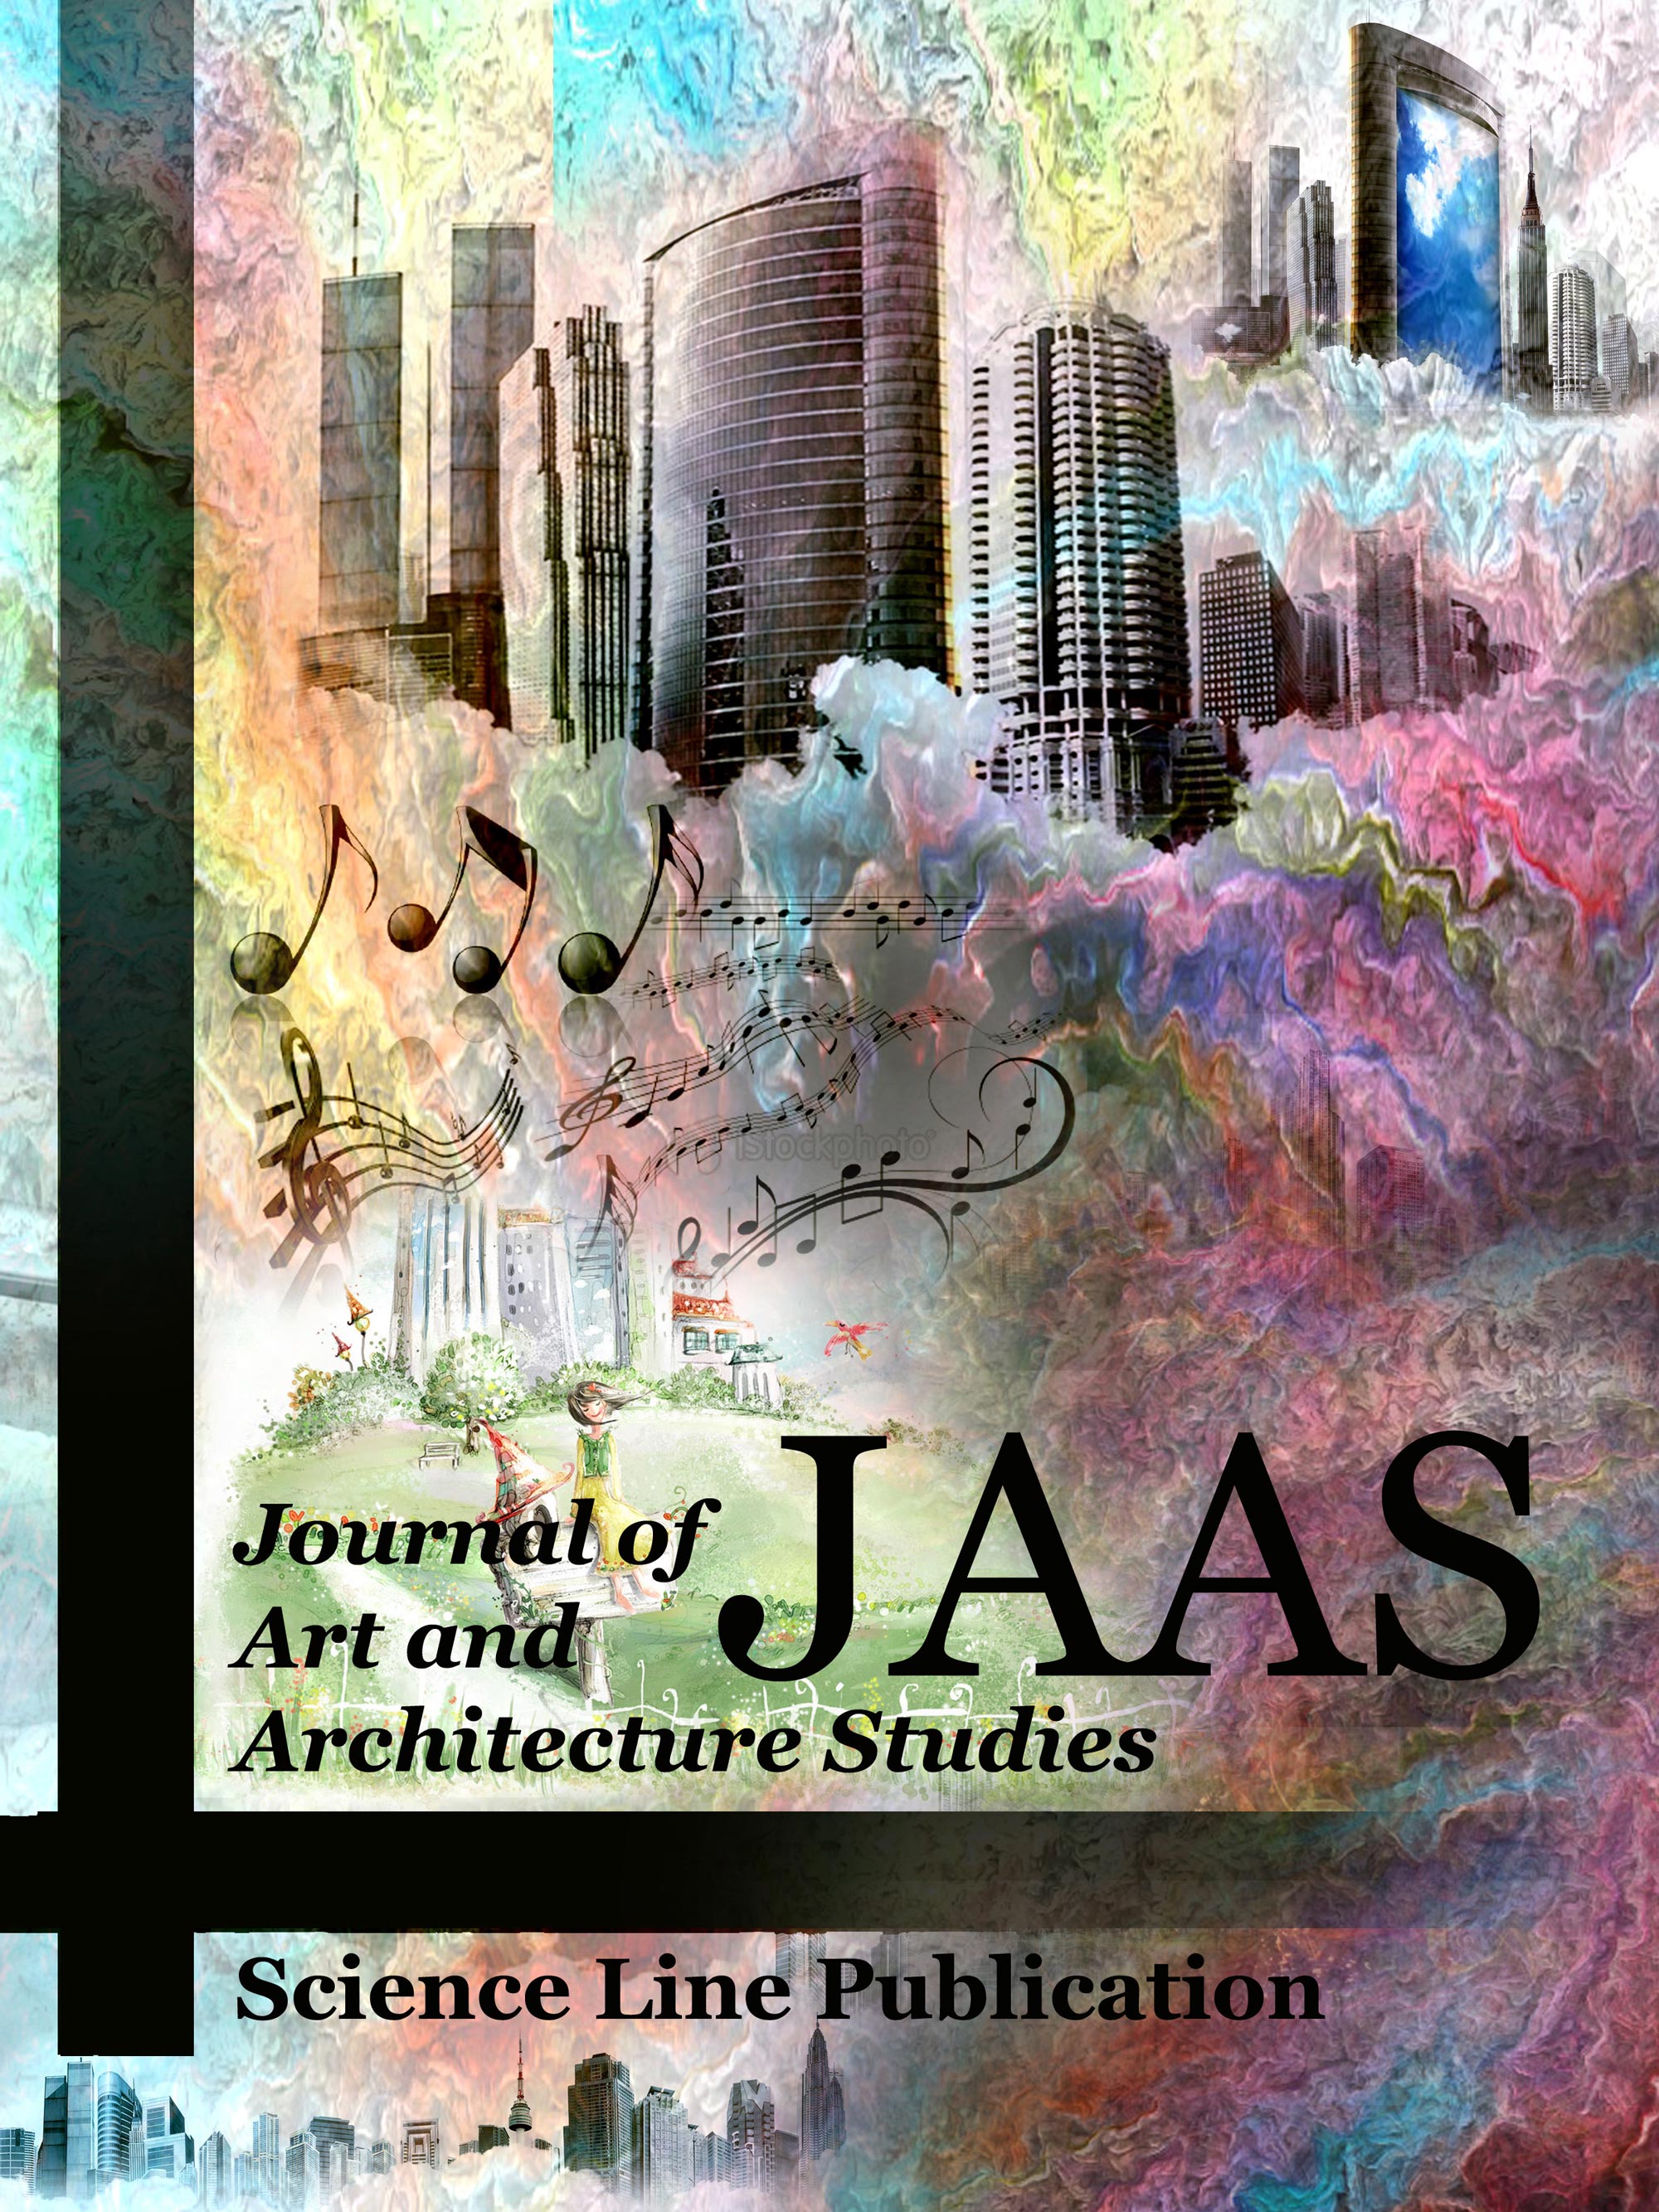 JAAS - Journal of Art and Architecture Studies